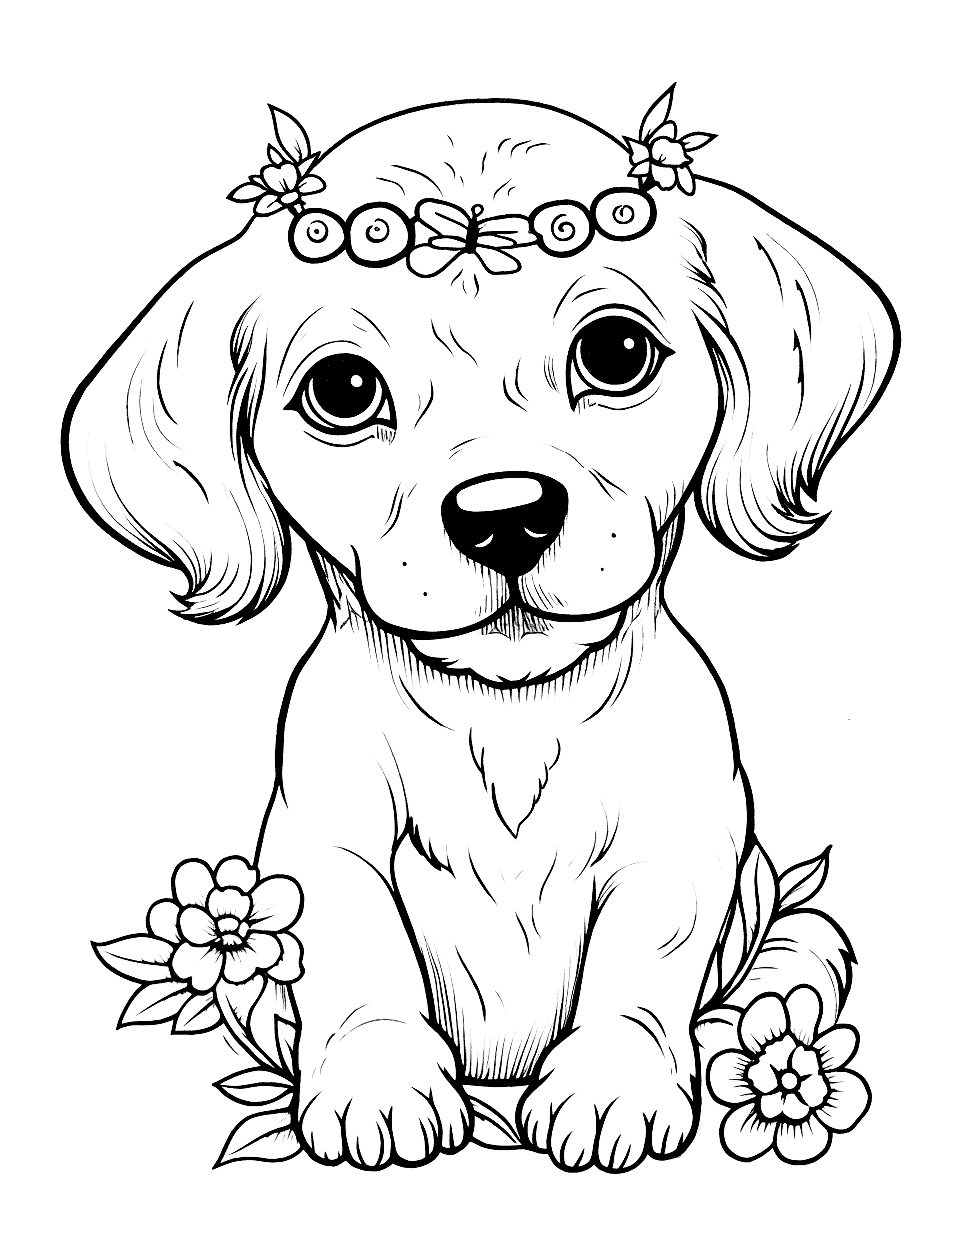 Cute coloring pages free printable sheets